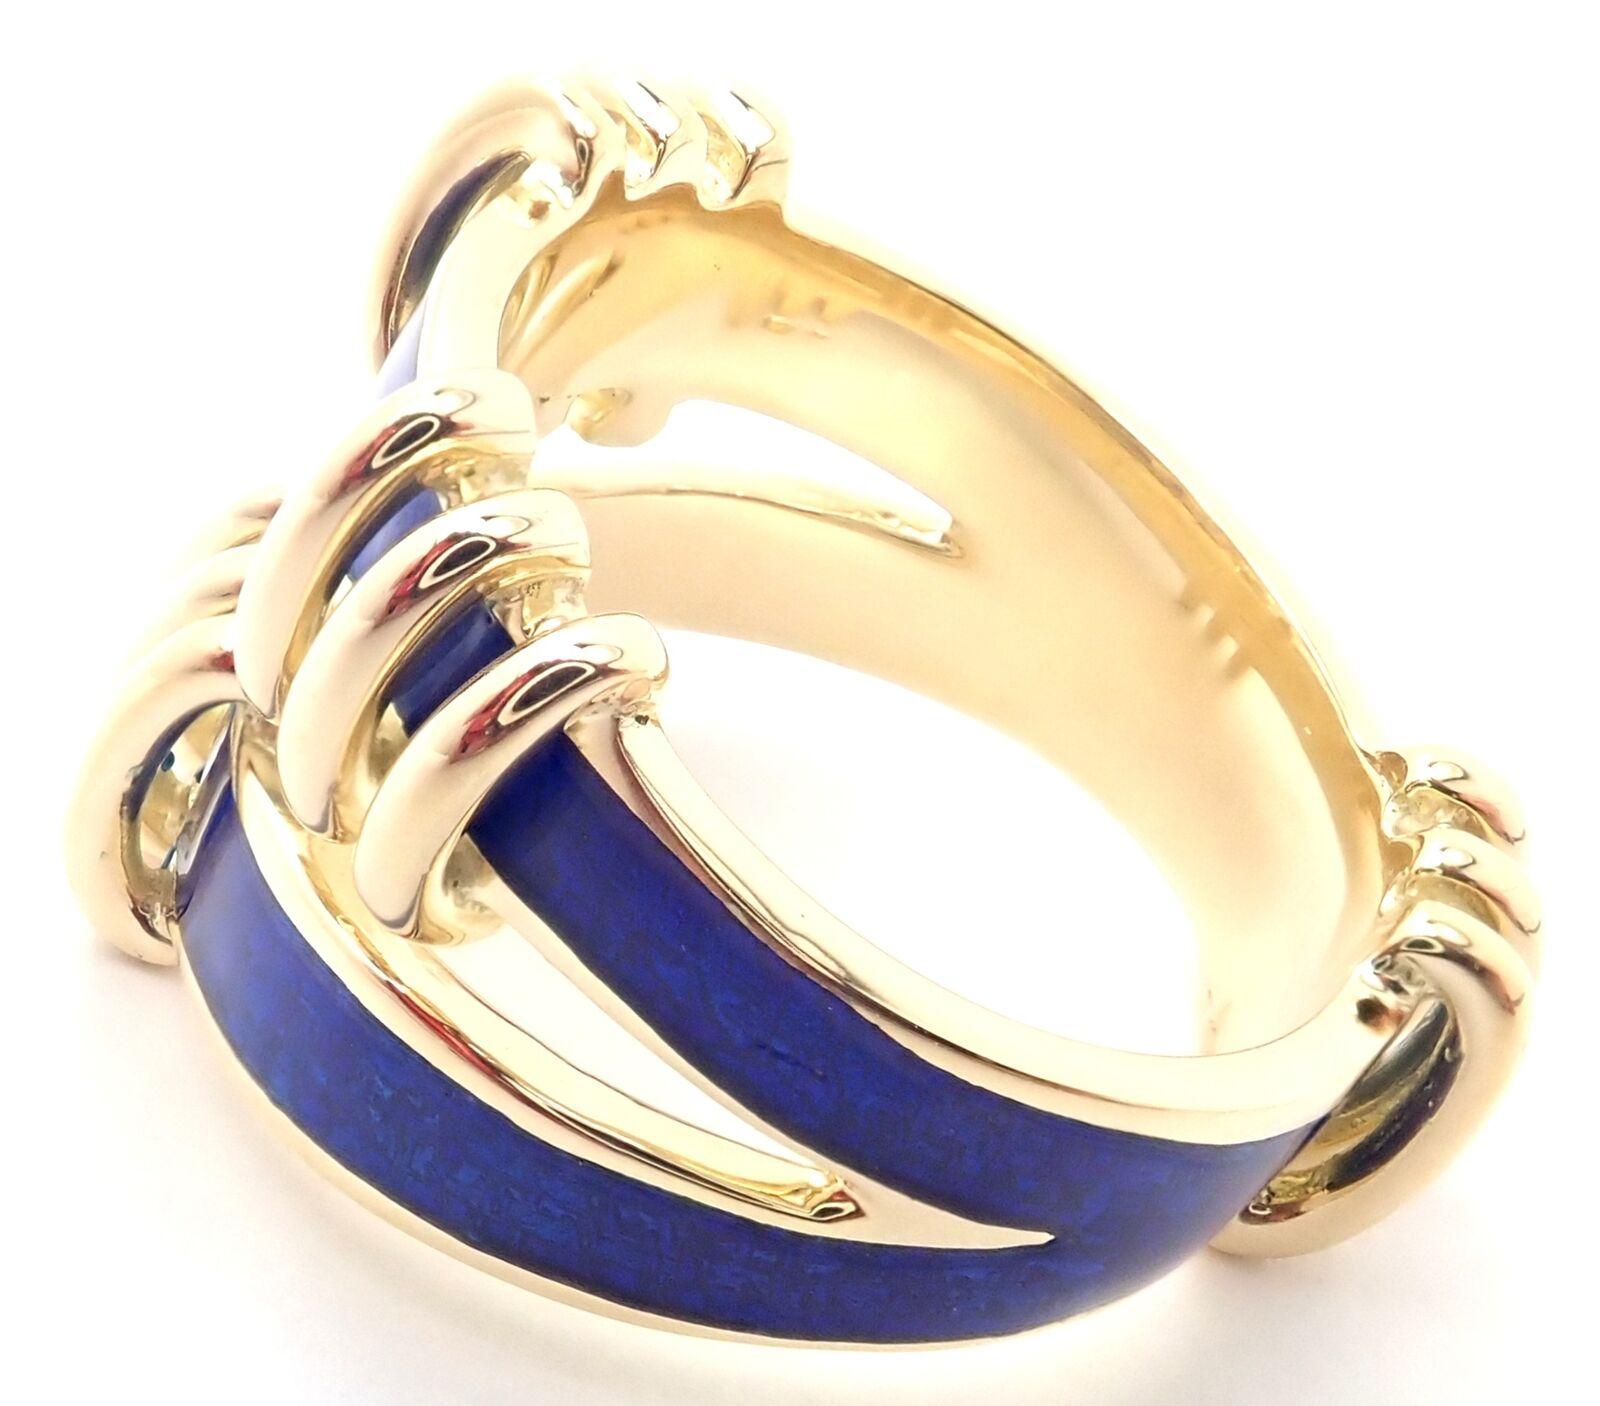 18k Yellow Gold Blue Enamel Band Ring by Jean Schlumberger for Tiffany & Co. 
Details:
Ring Size: 7
Weight: 10.7 grams
Width: 16mm
Stamped Hallmarks: Schlumberger Tiffany 18k
*Free Shipping within the United States*
YOUR PRICE: $4,500
T3056oodd